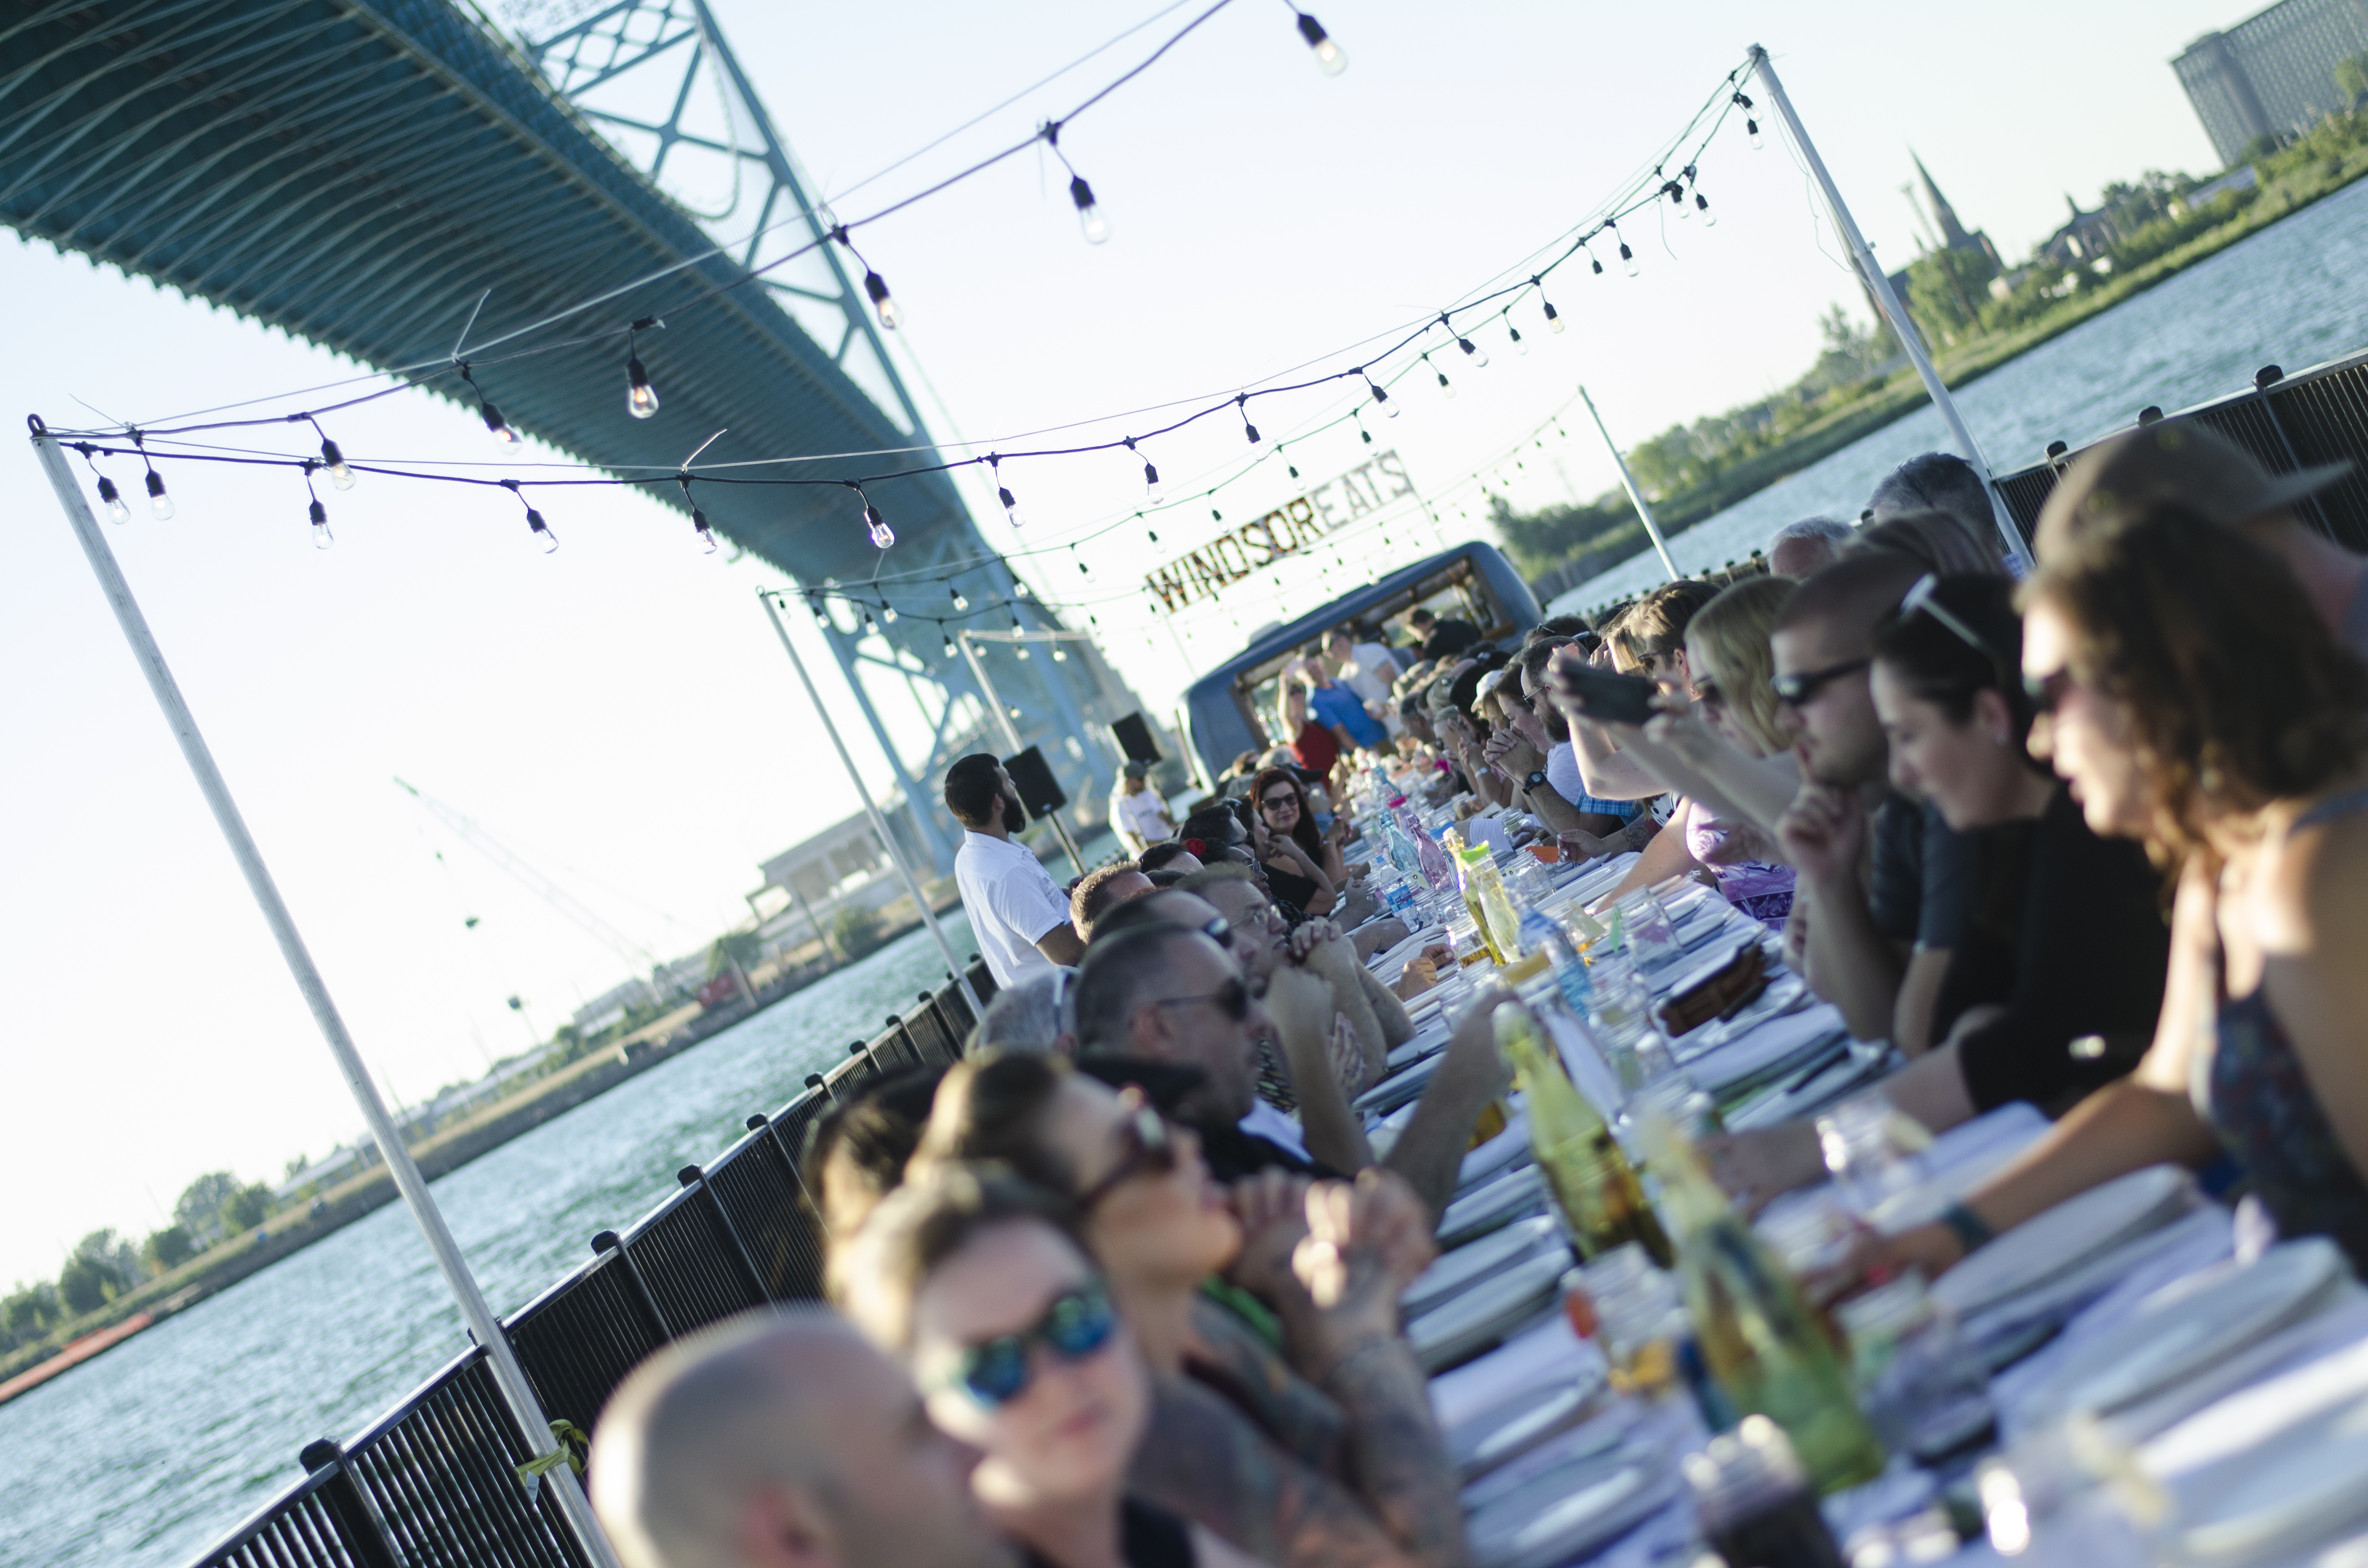 Dining al fresco in the most anticipated annual dining experience in Windsor, Ontario.